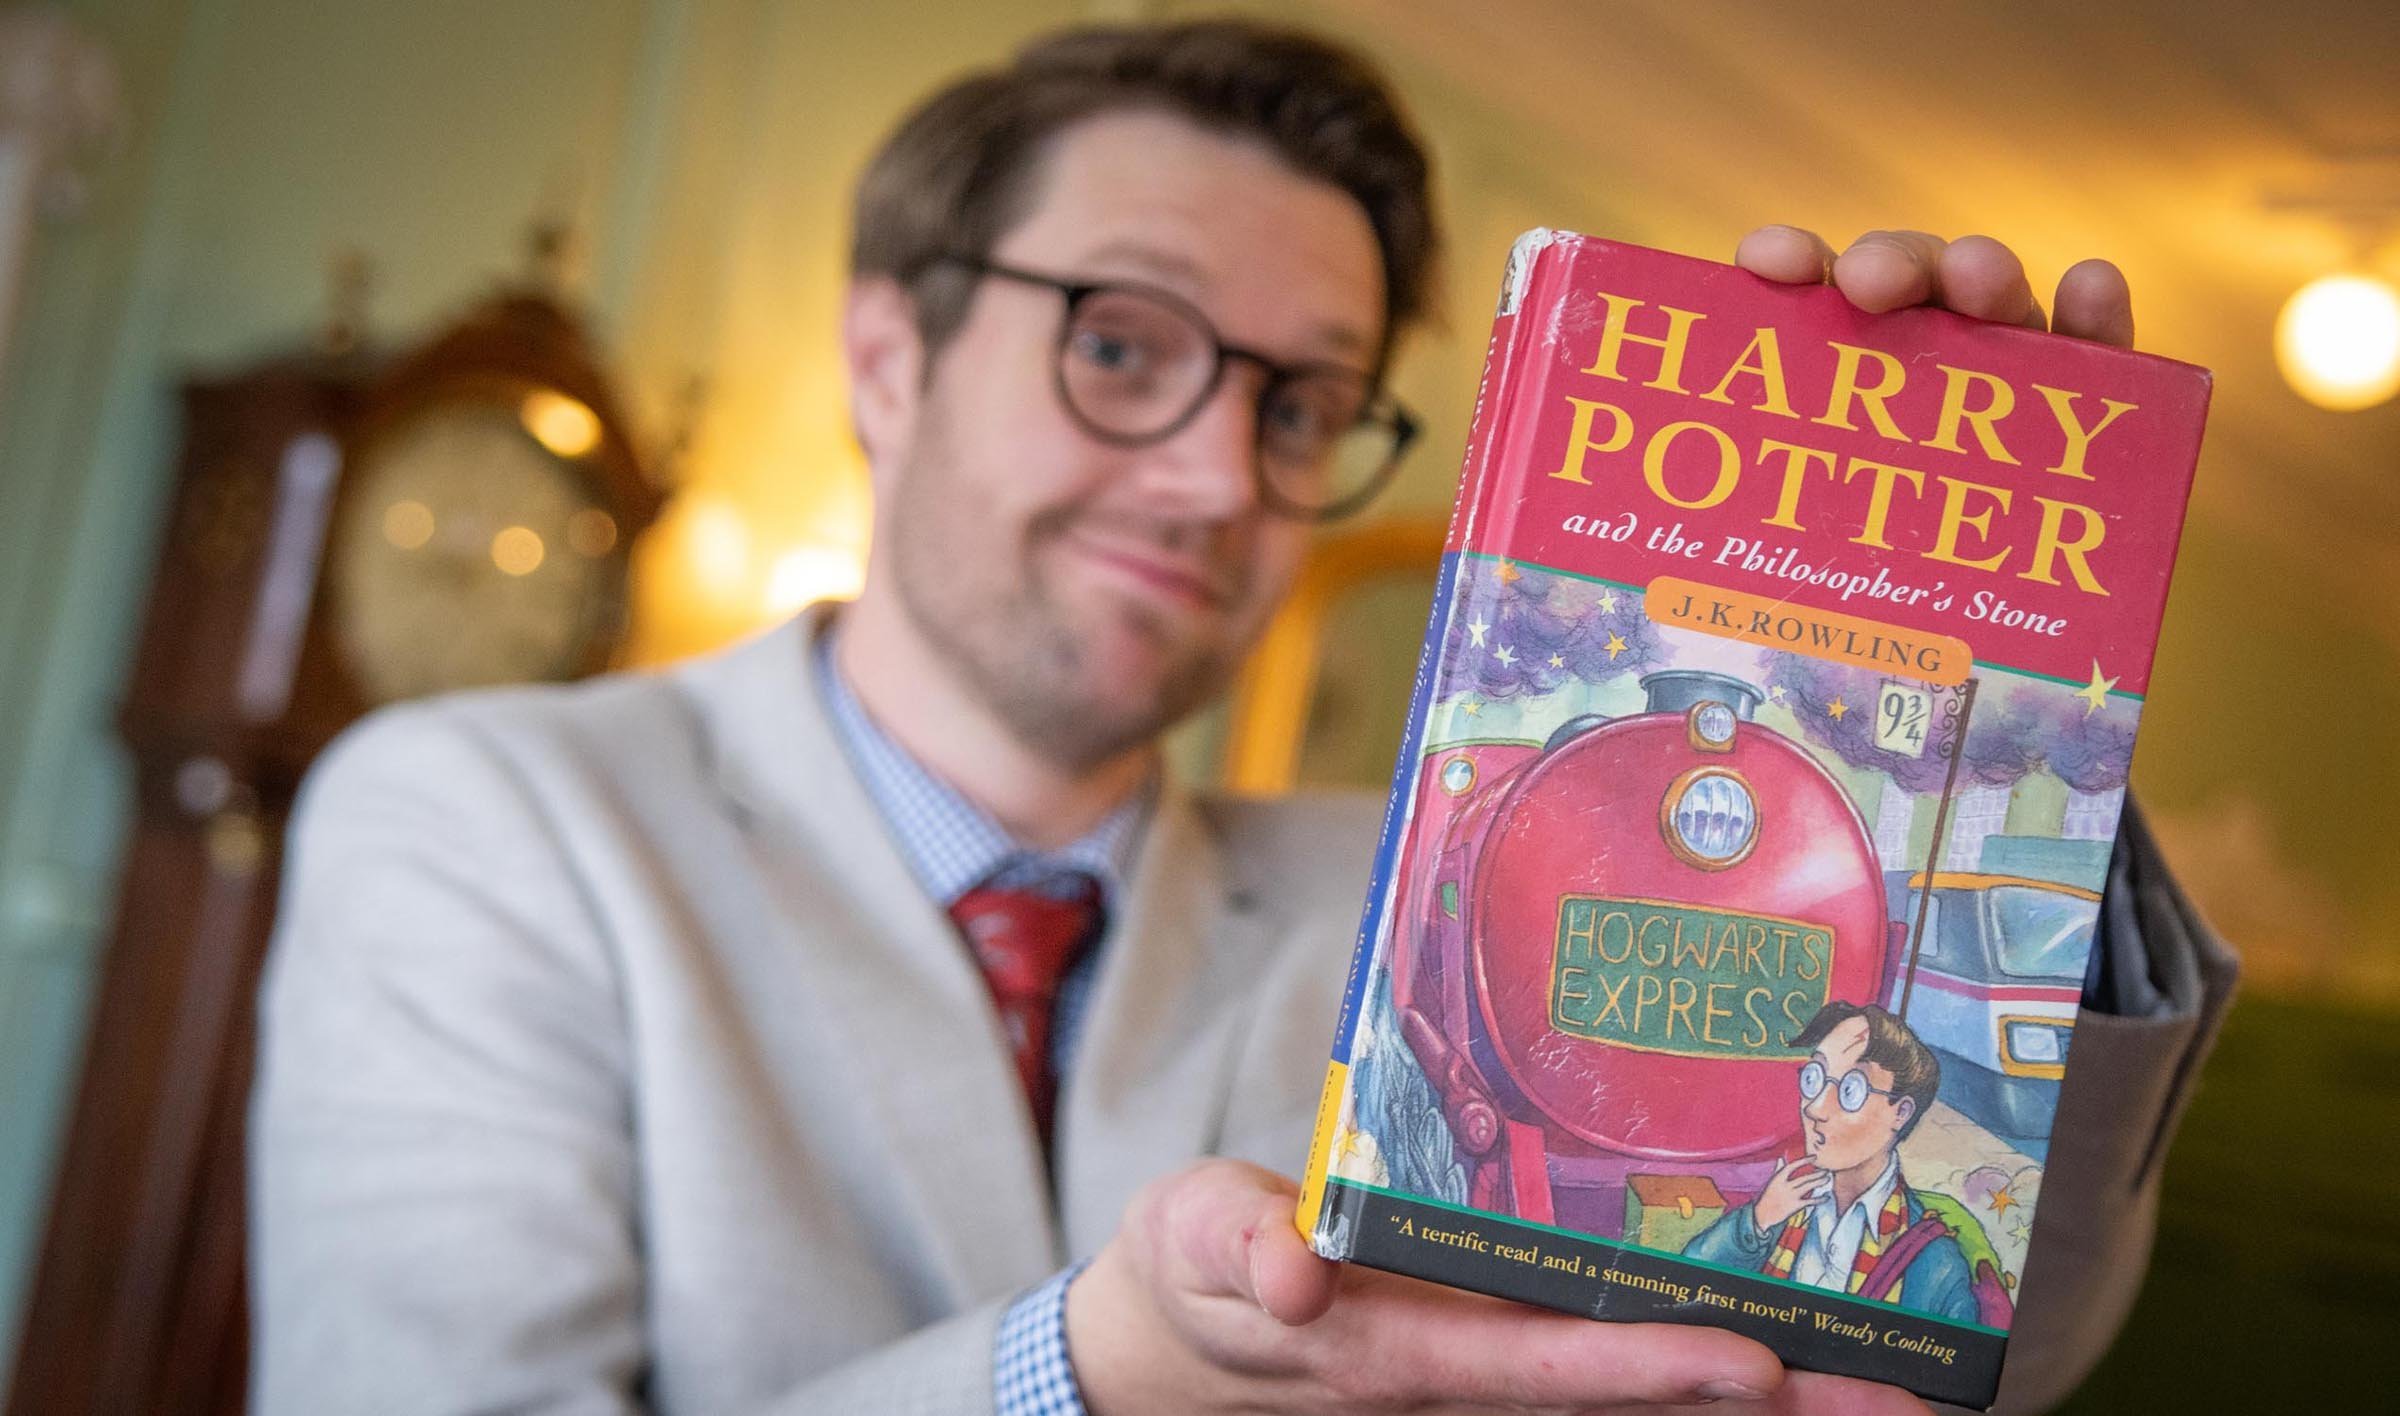 Harry Potter first edition auctioned off for $471,000